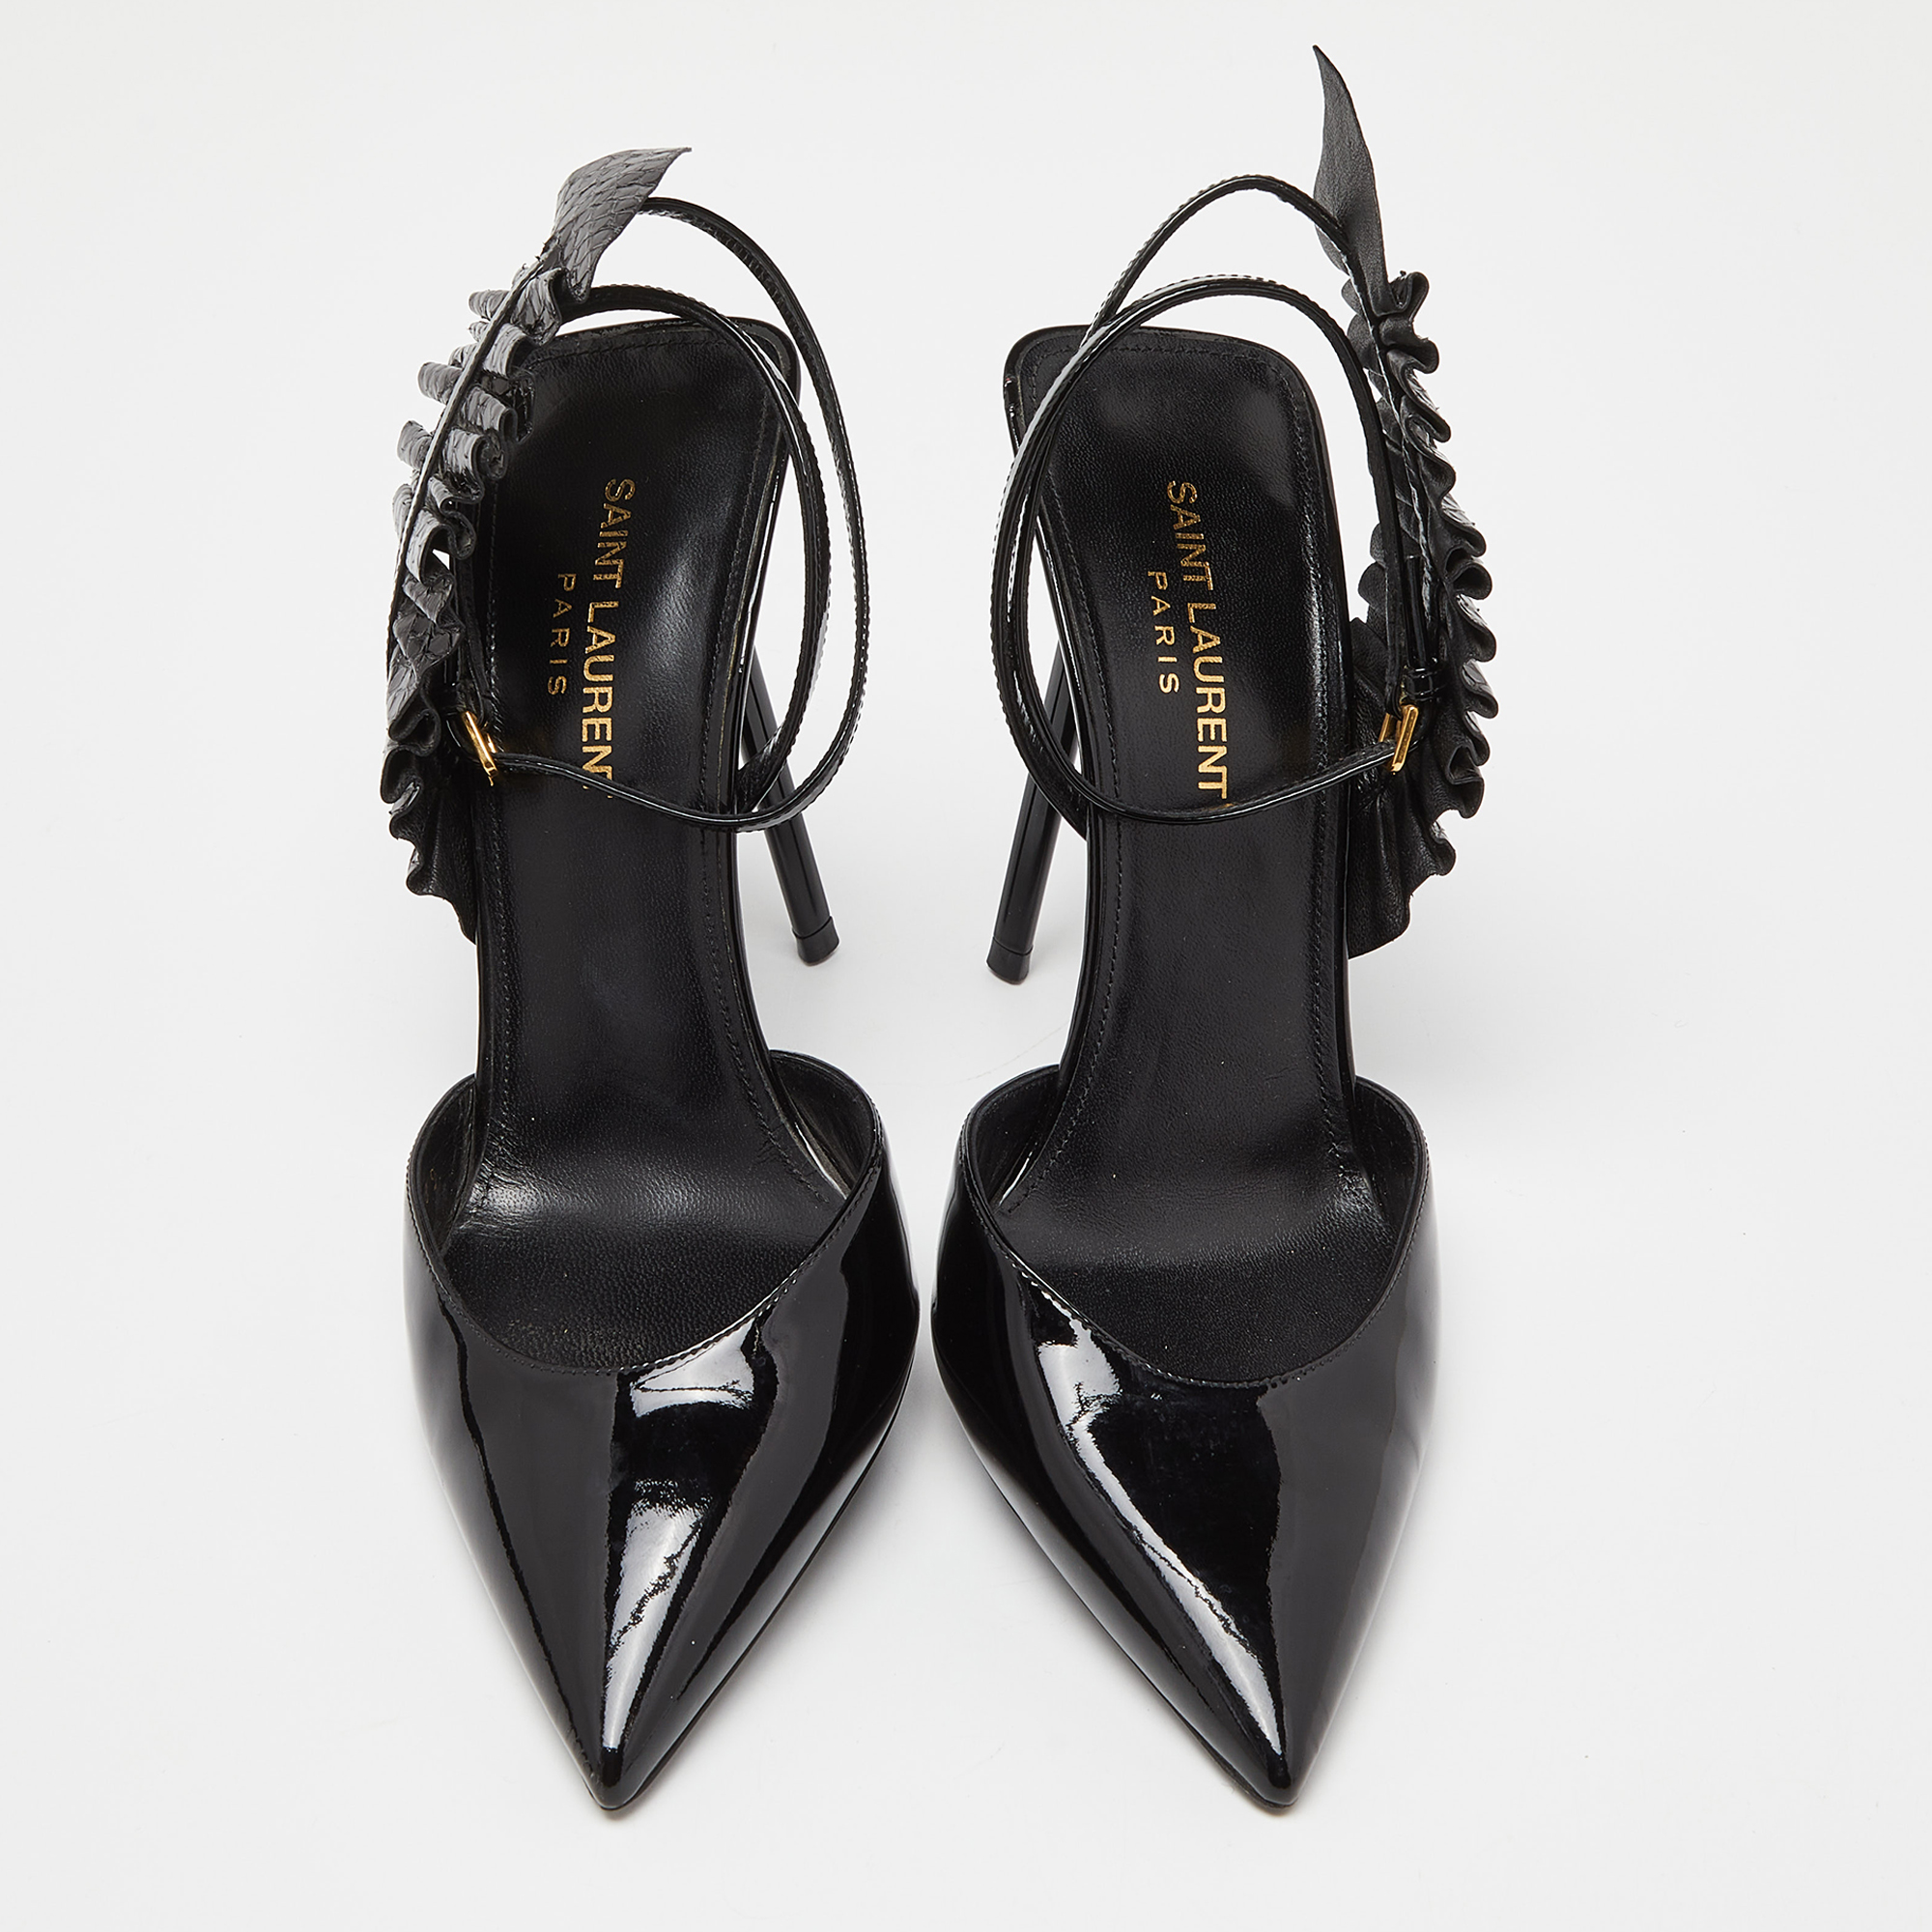 Saint Laurent Black Patent Leather And Watersnake Leather Pointed Toe Slingback Sandals Size 39